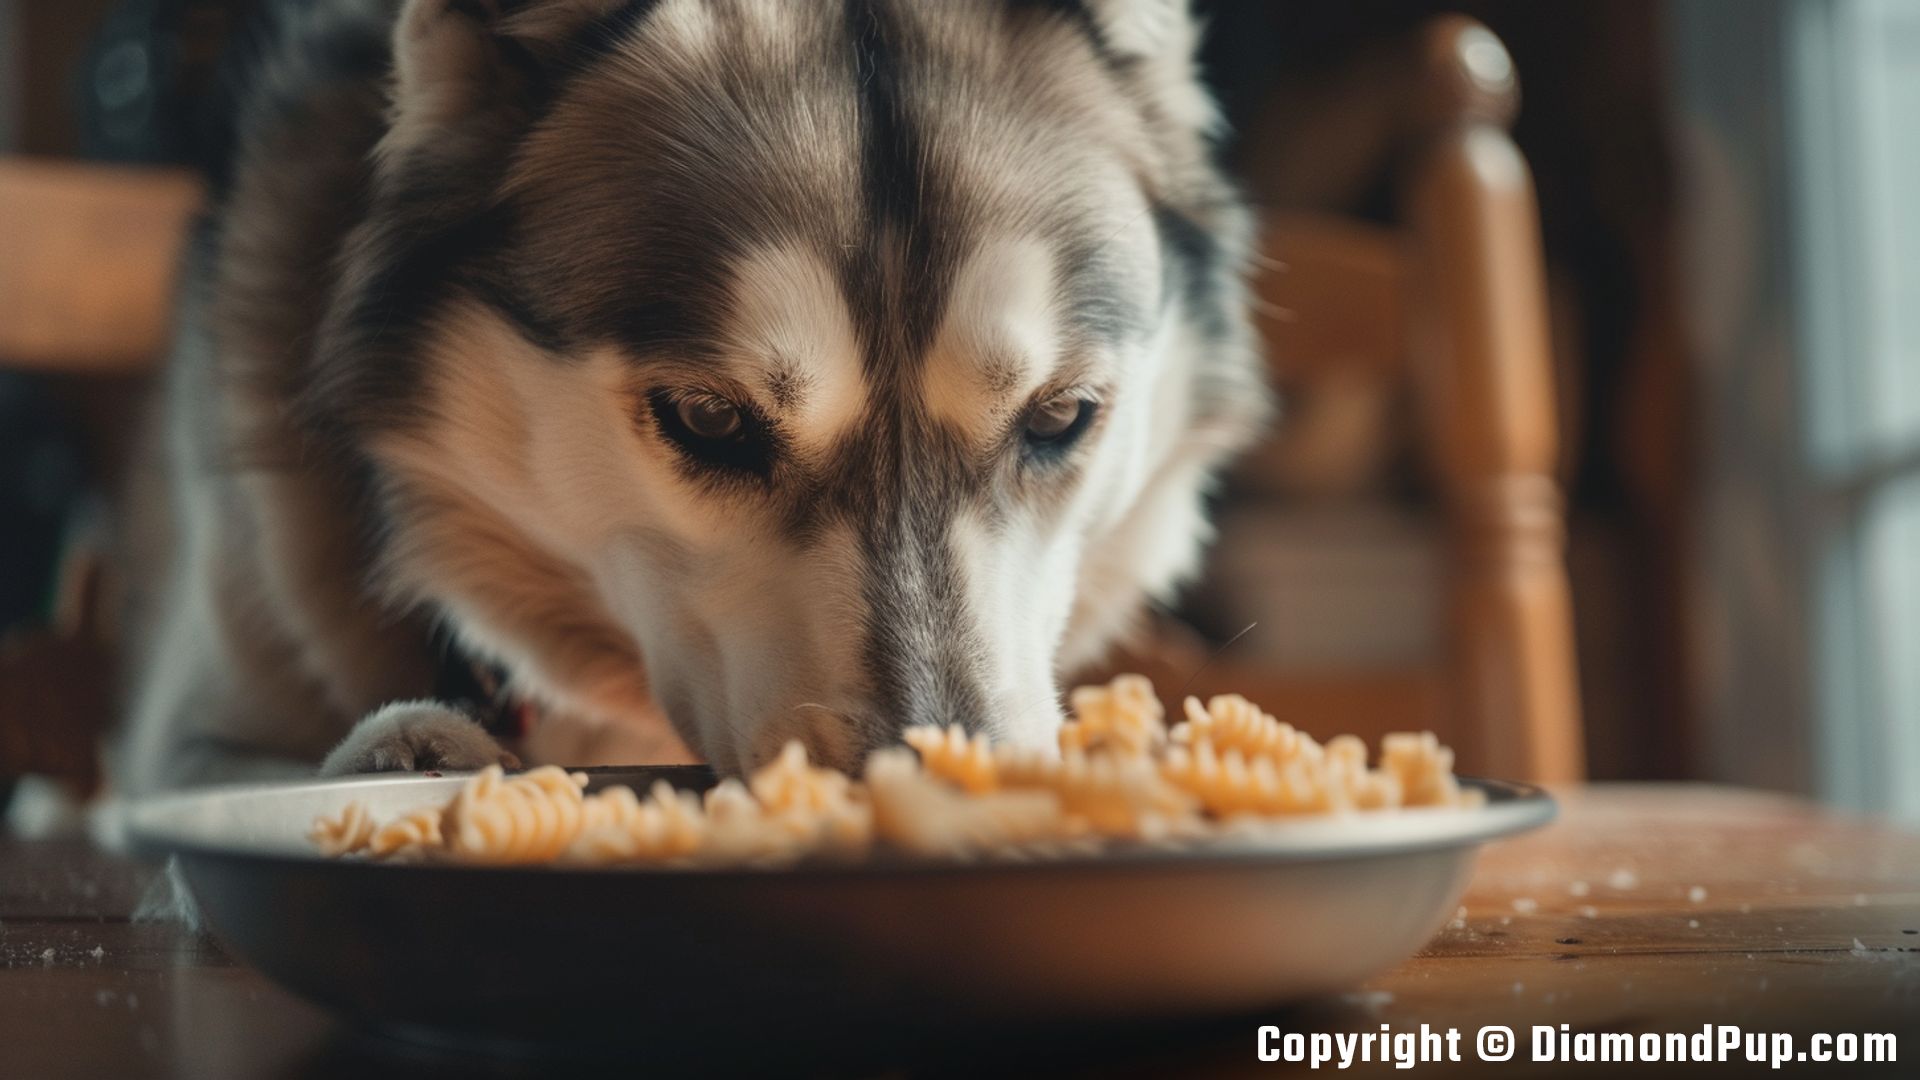 Photo of a Cute Husky Eating Pasta